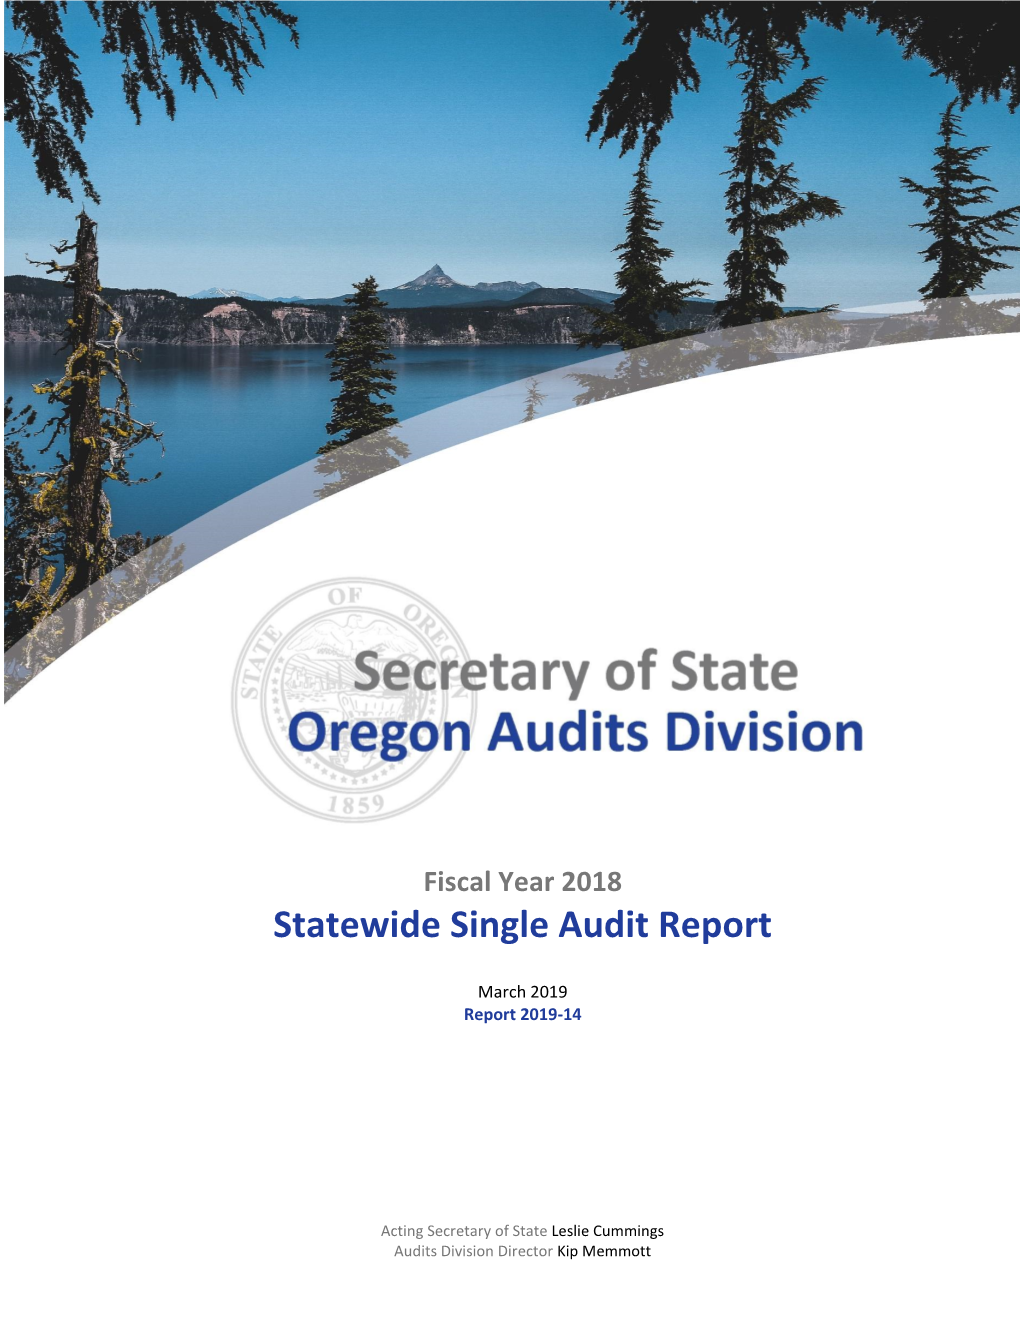 Statewide Single Audit Report